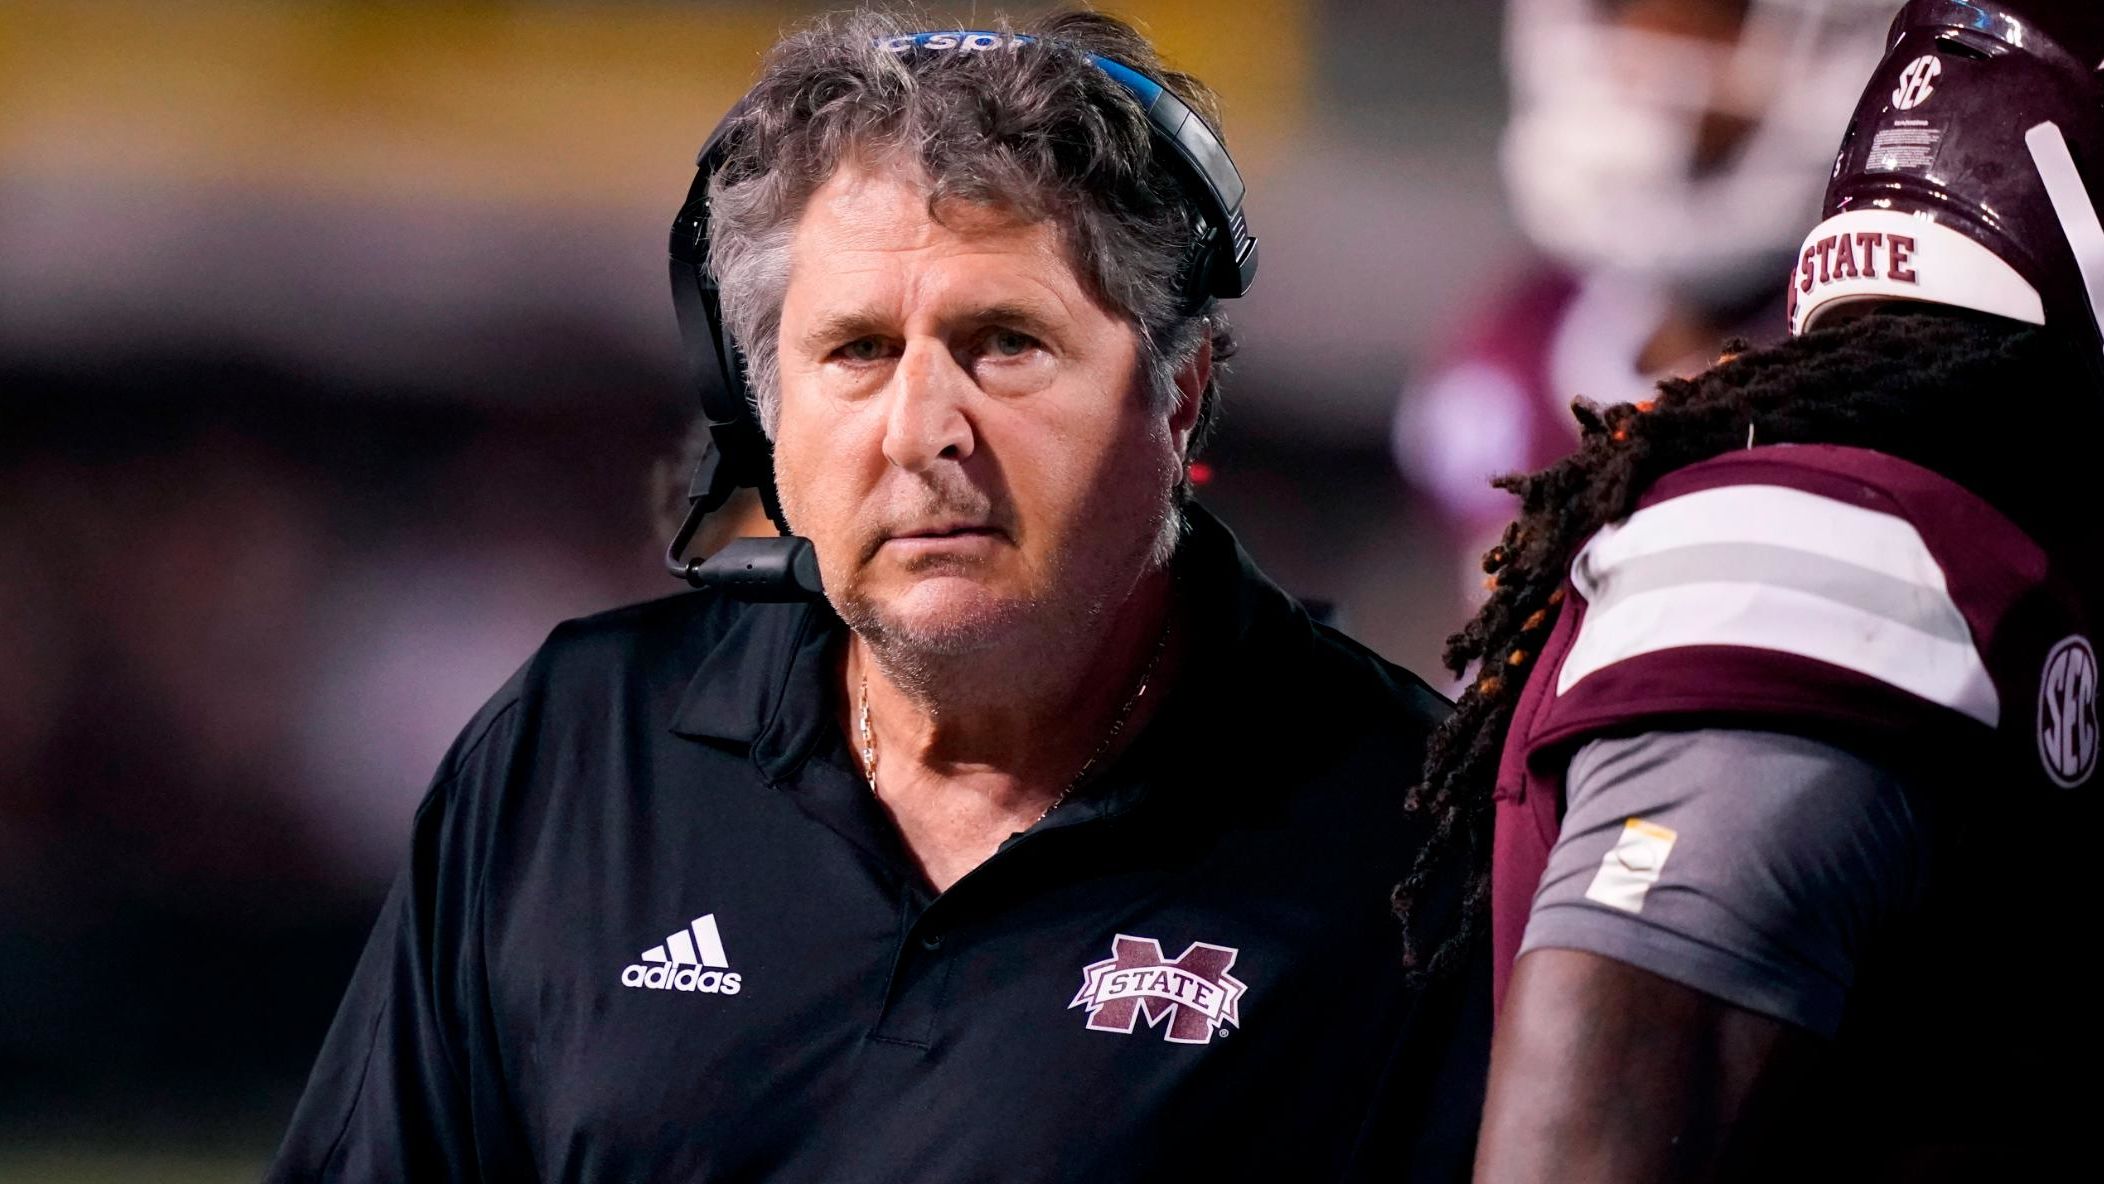 Mississippi State head football coach <a href="https://www.cnn.com/2022/12/13/sport/mike-leach-death-mississippi-state-spt-intl/index.html" target="_blank">Mike Leach</a> died from heart condition complications, the university announced on December 13. He was 61.